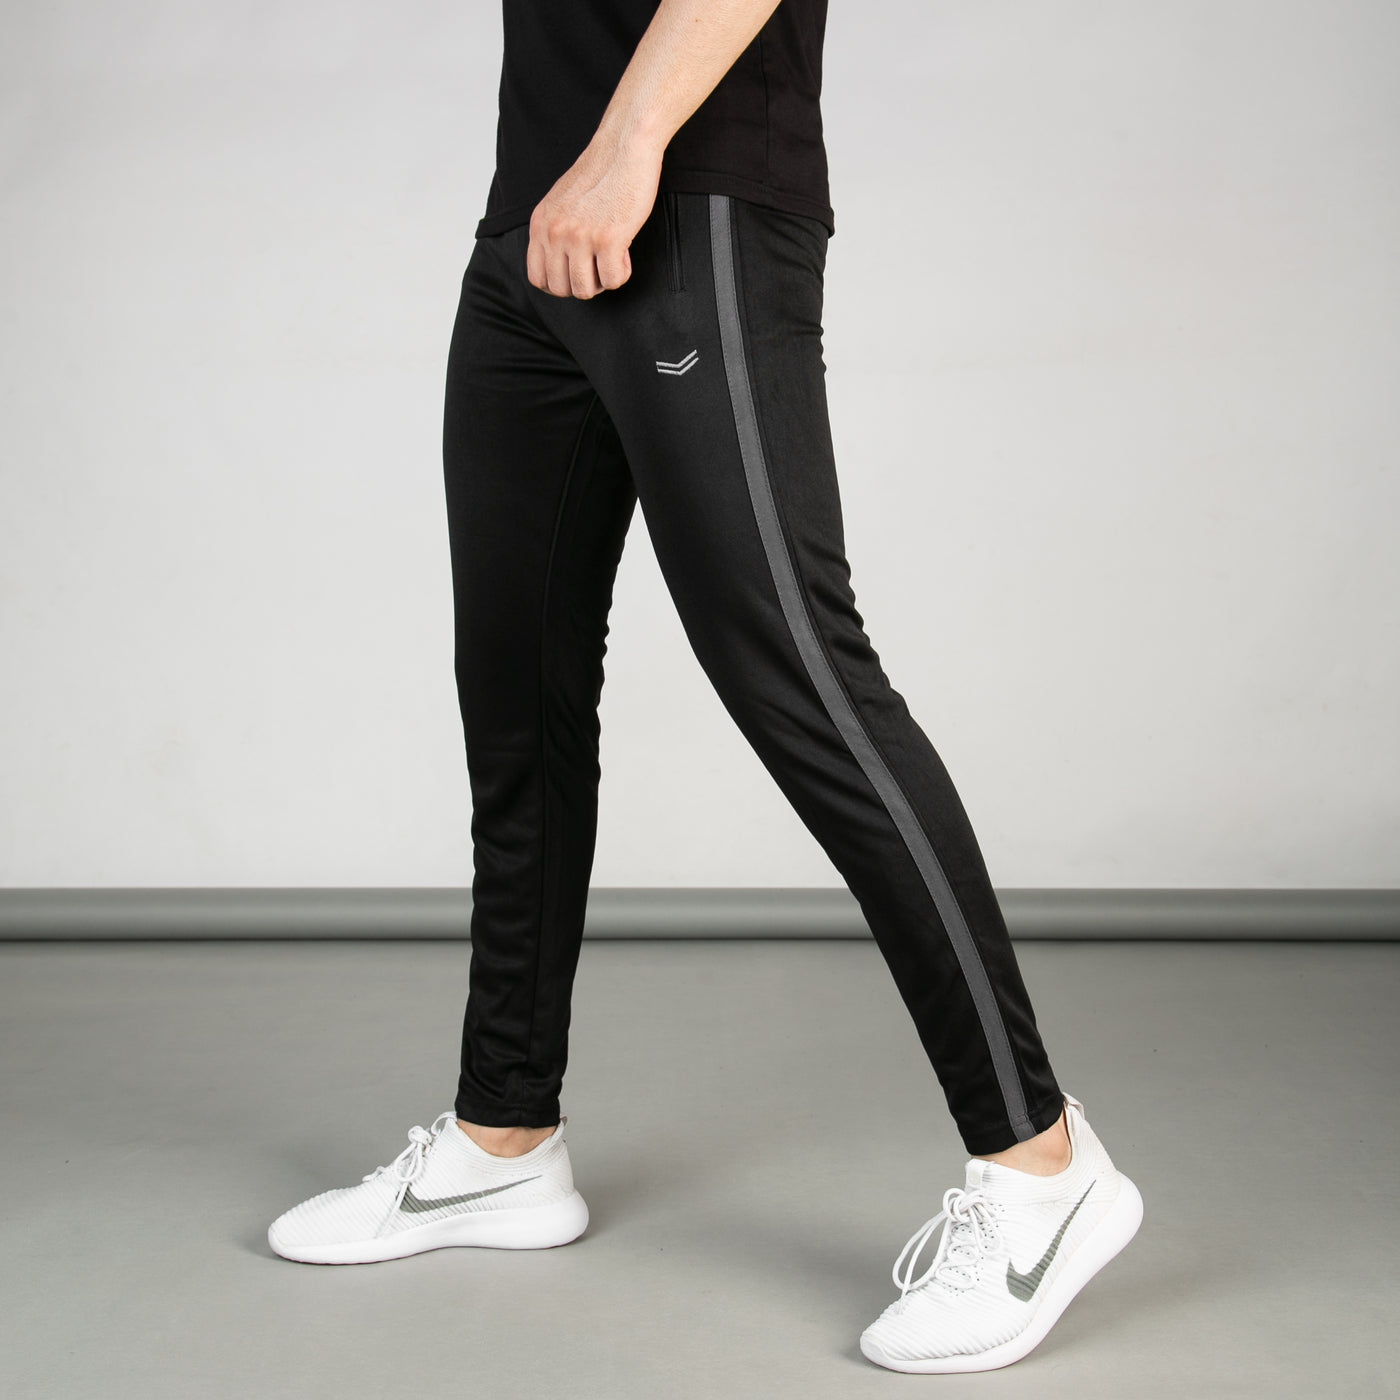 Black Quick Dry Bottoms with Sleek Charcoal Stripe